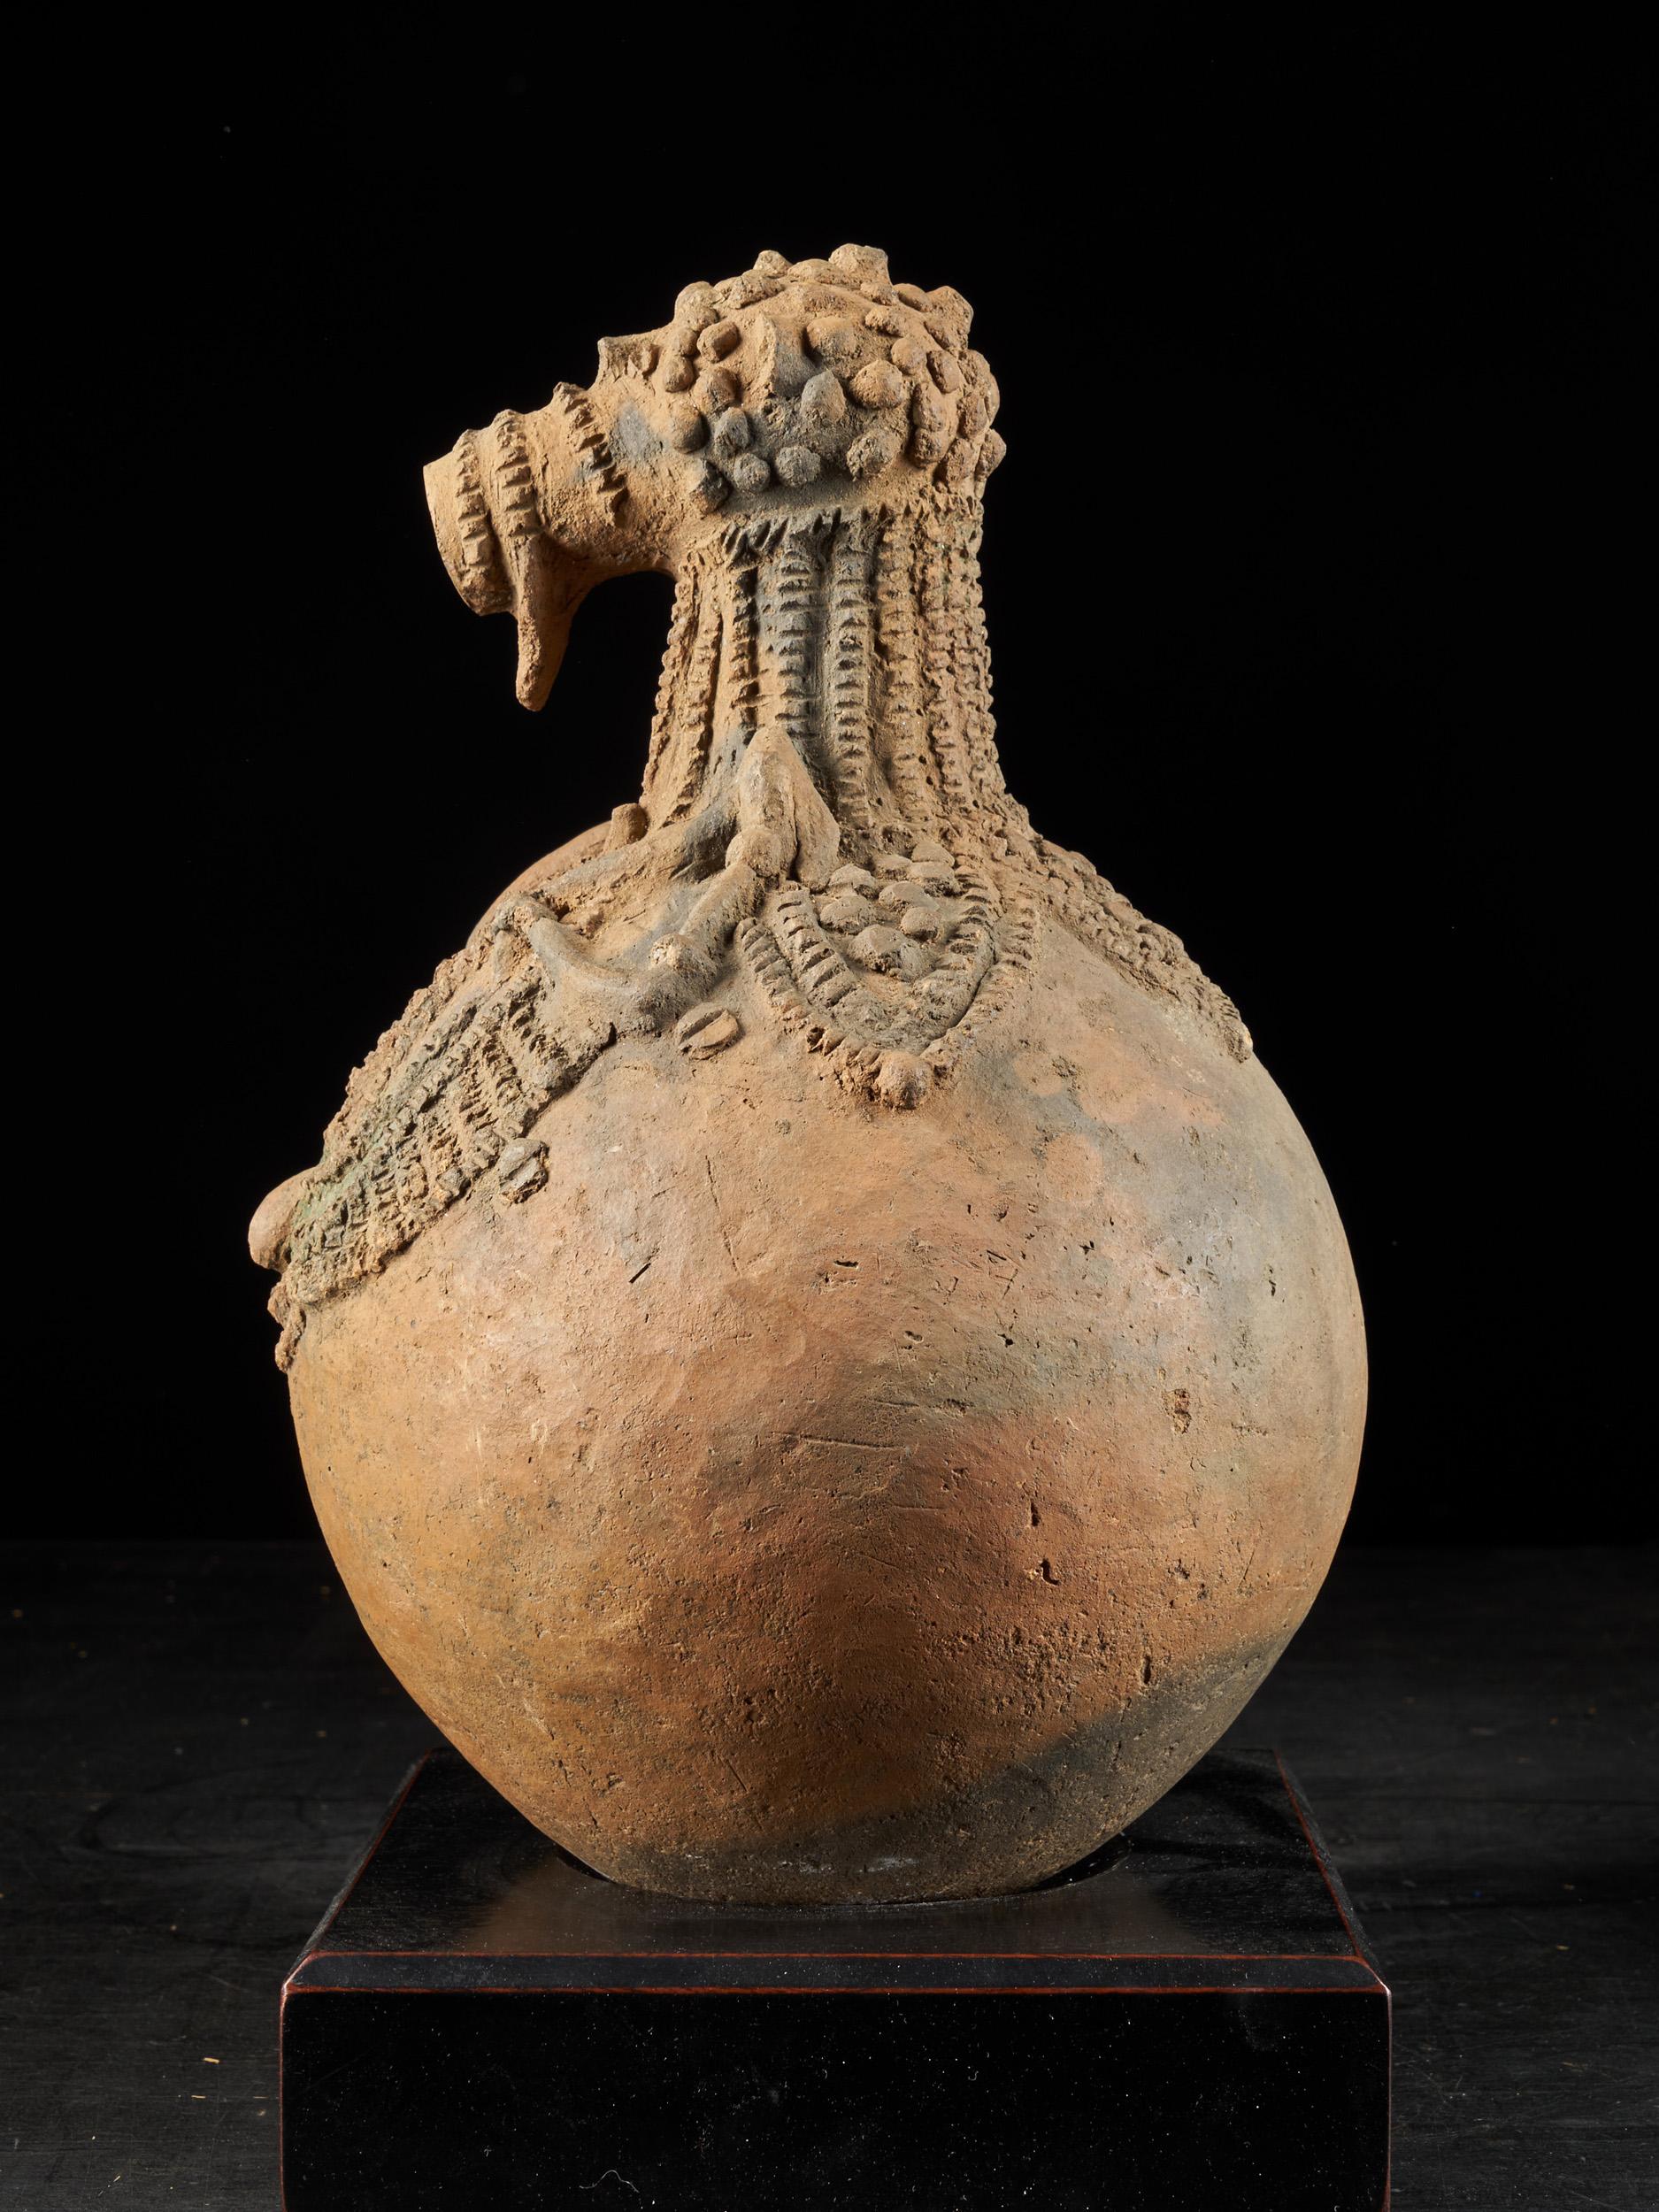 Anthropomorphic Clay Pots have been used by the Village Population of Gaanda Tribe, settling in the remote areas of Gongola and Benue River. These Spirit-Pots have been used nearly by every Tribal Family, inside the House Shrines, to worship local